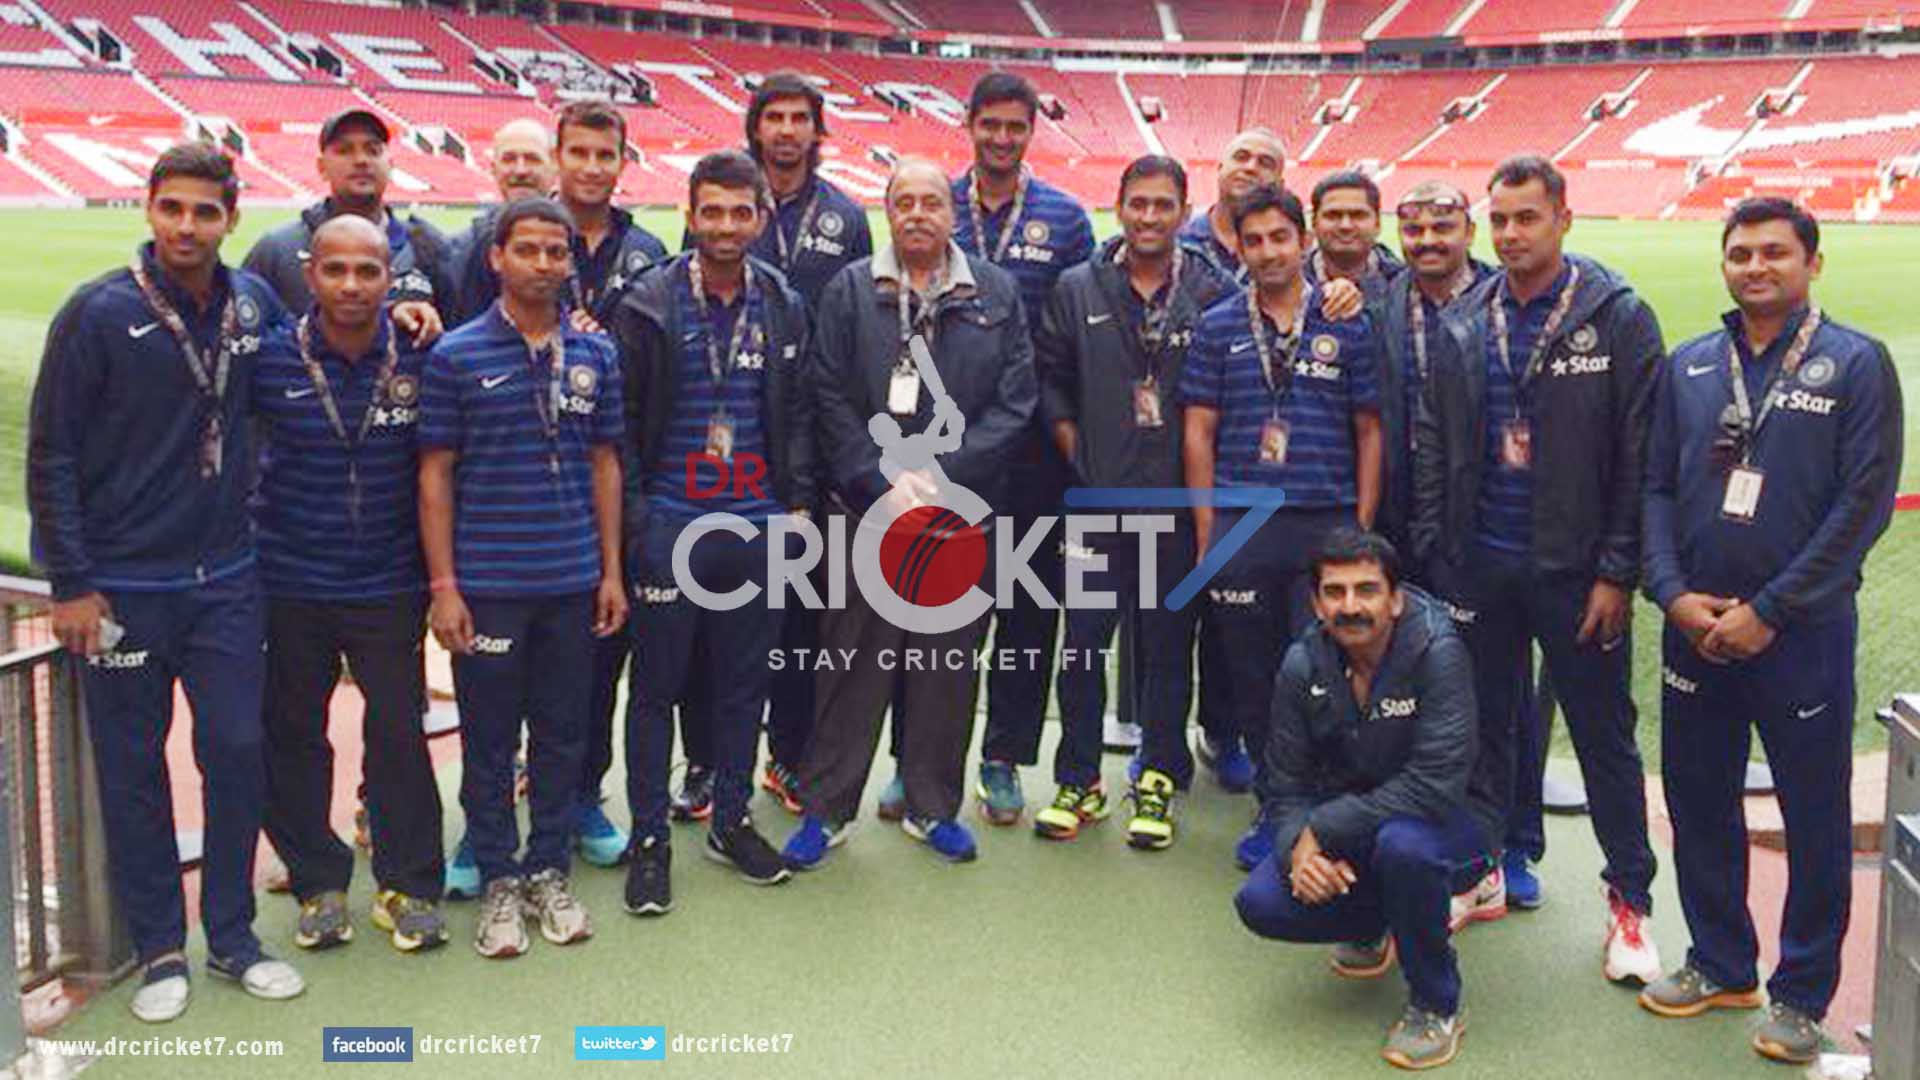 Team India's visit to Old Trafford